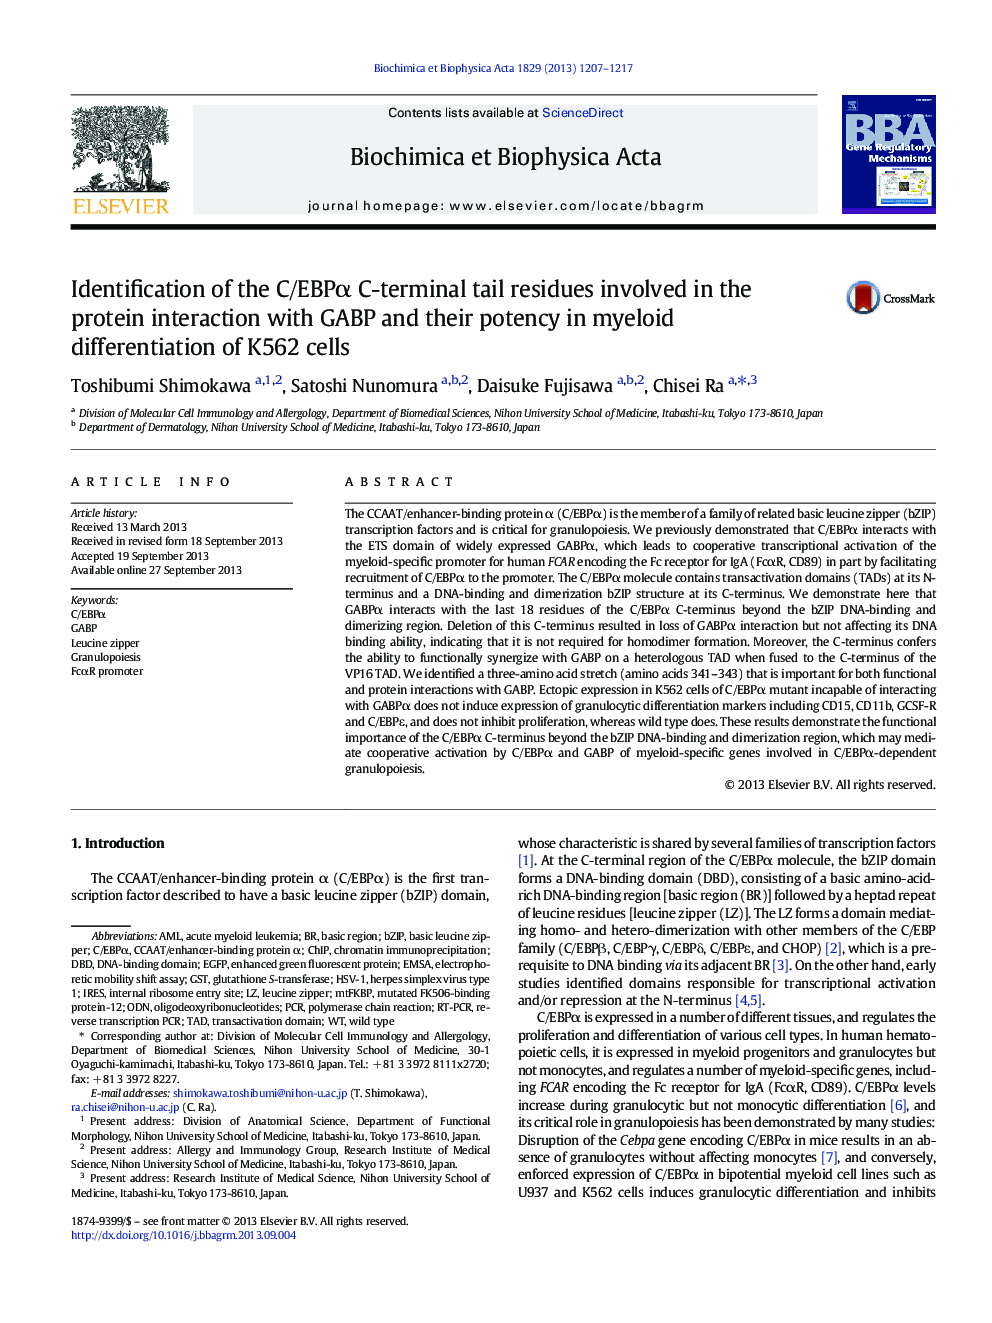 Identification of the C/EBPα C-terminal tail residues involved in the protein interaction with GABP and their potency in myeloid differentiation of K562 cells